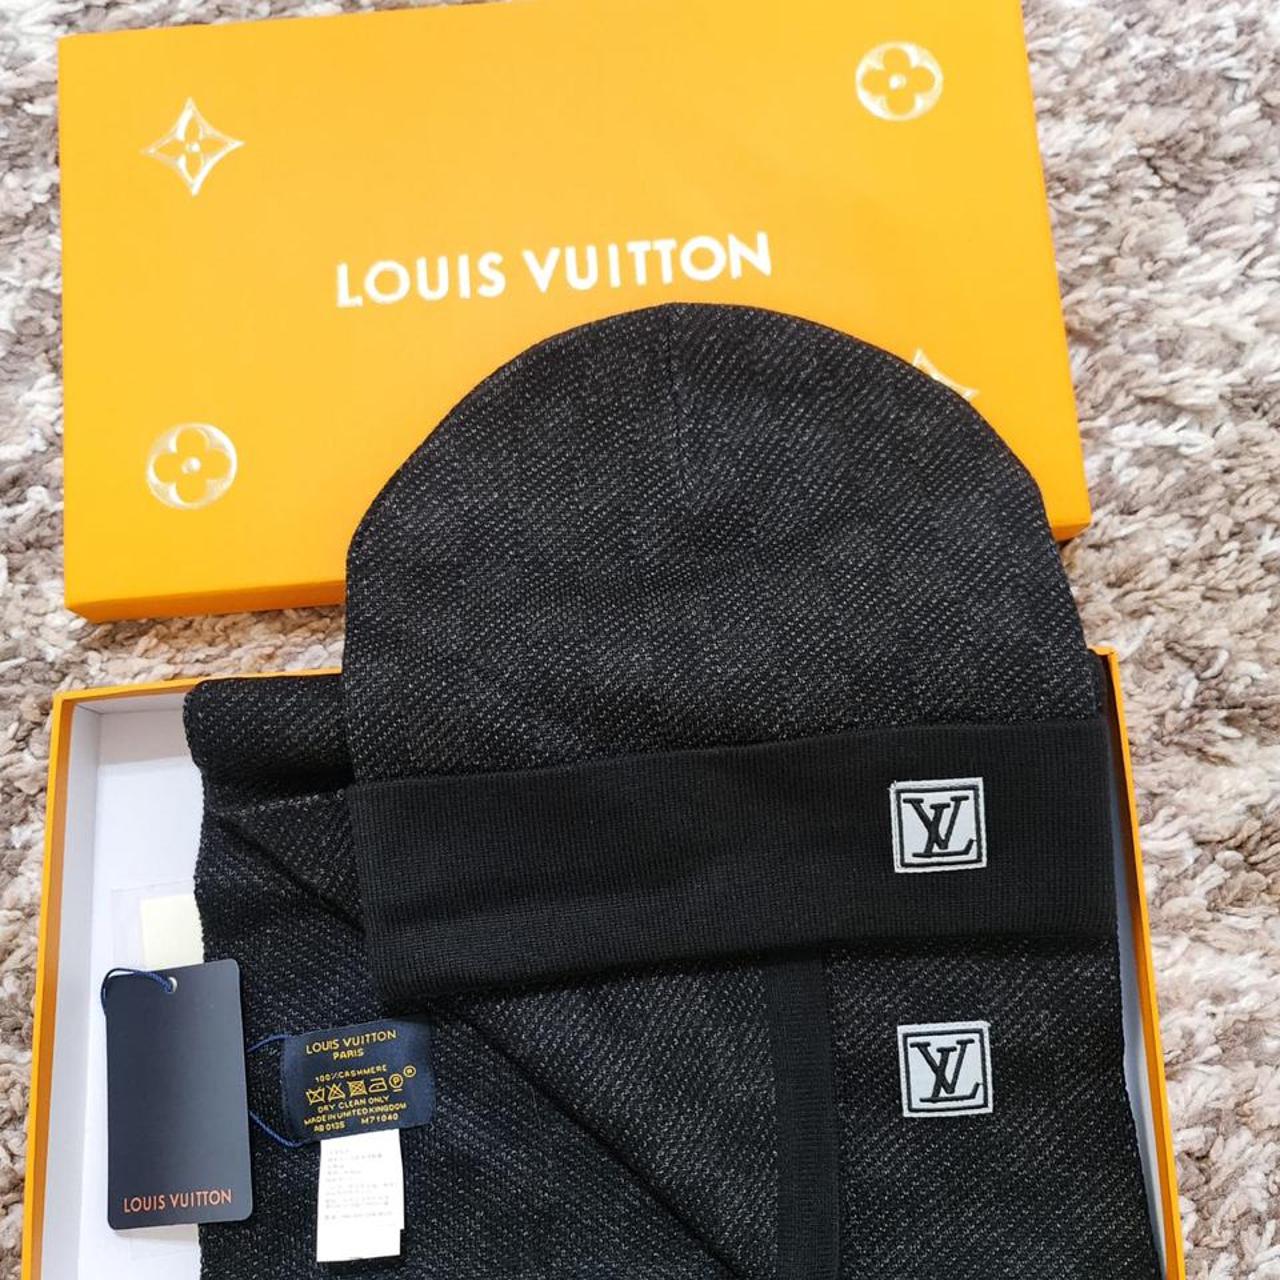 Louis Vuitton Hat & Scarf, 4 Colour ways as you can